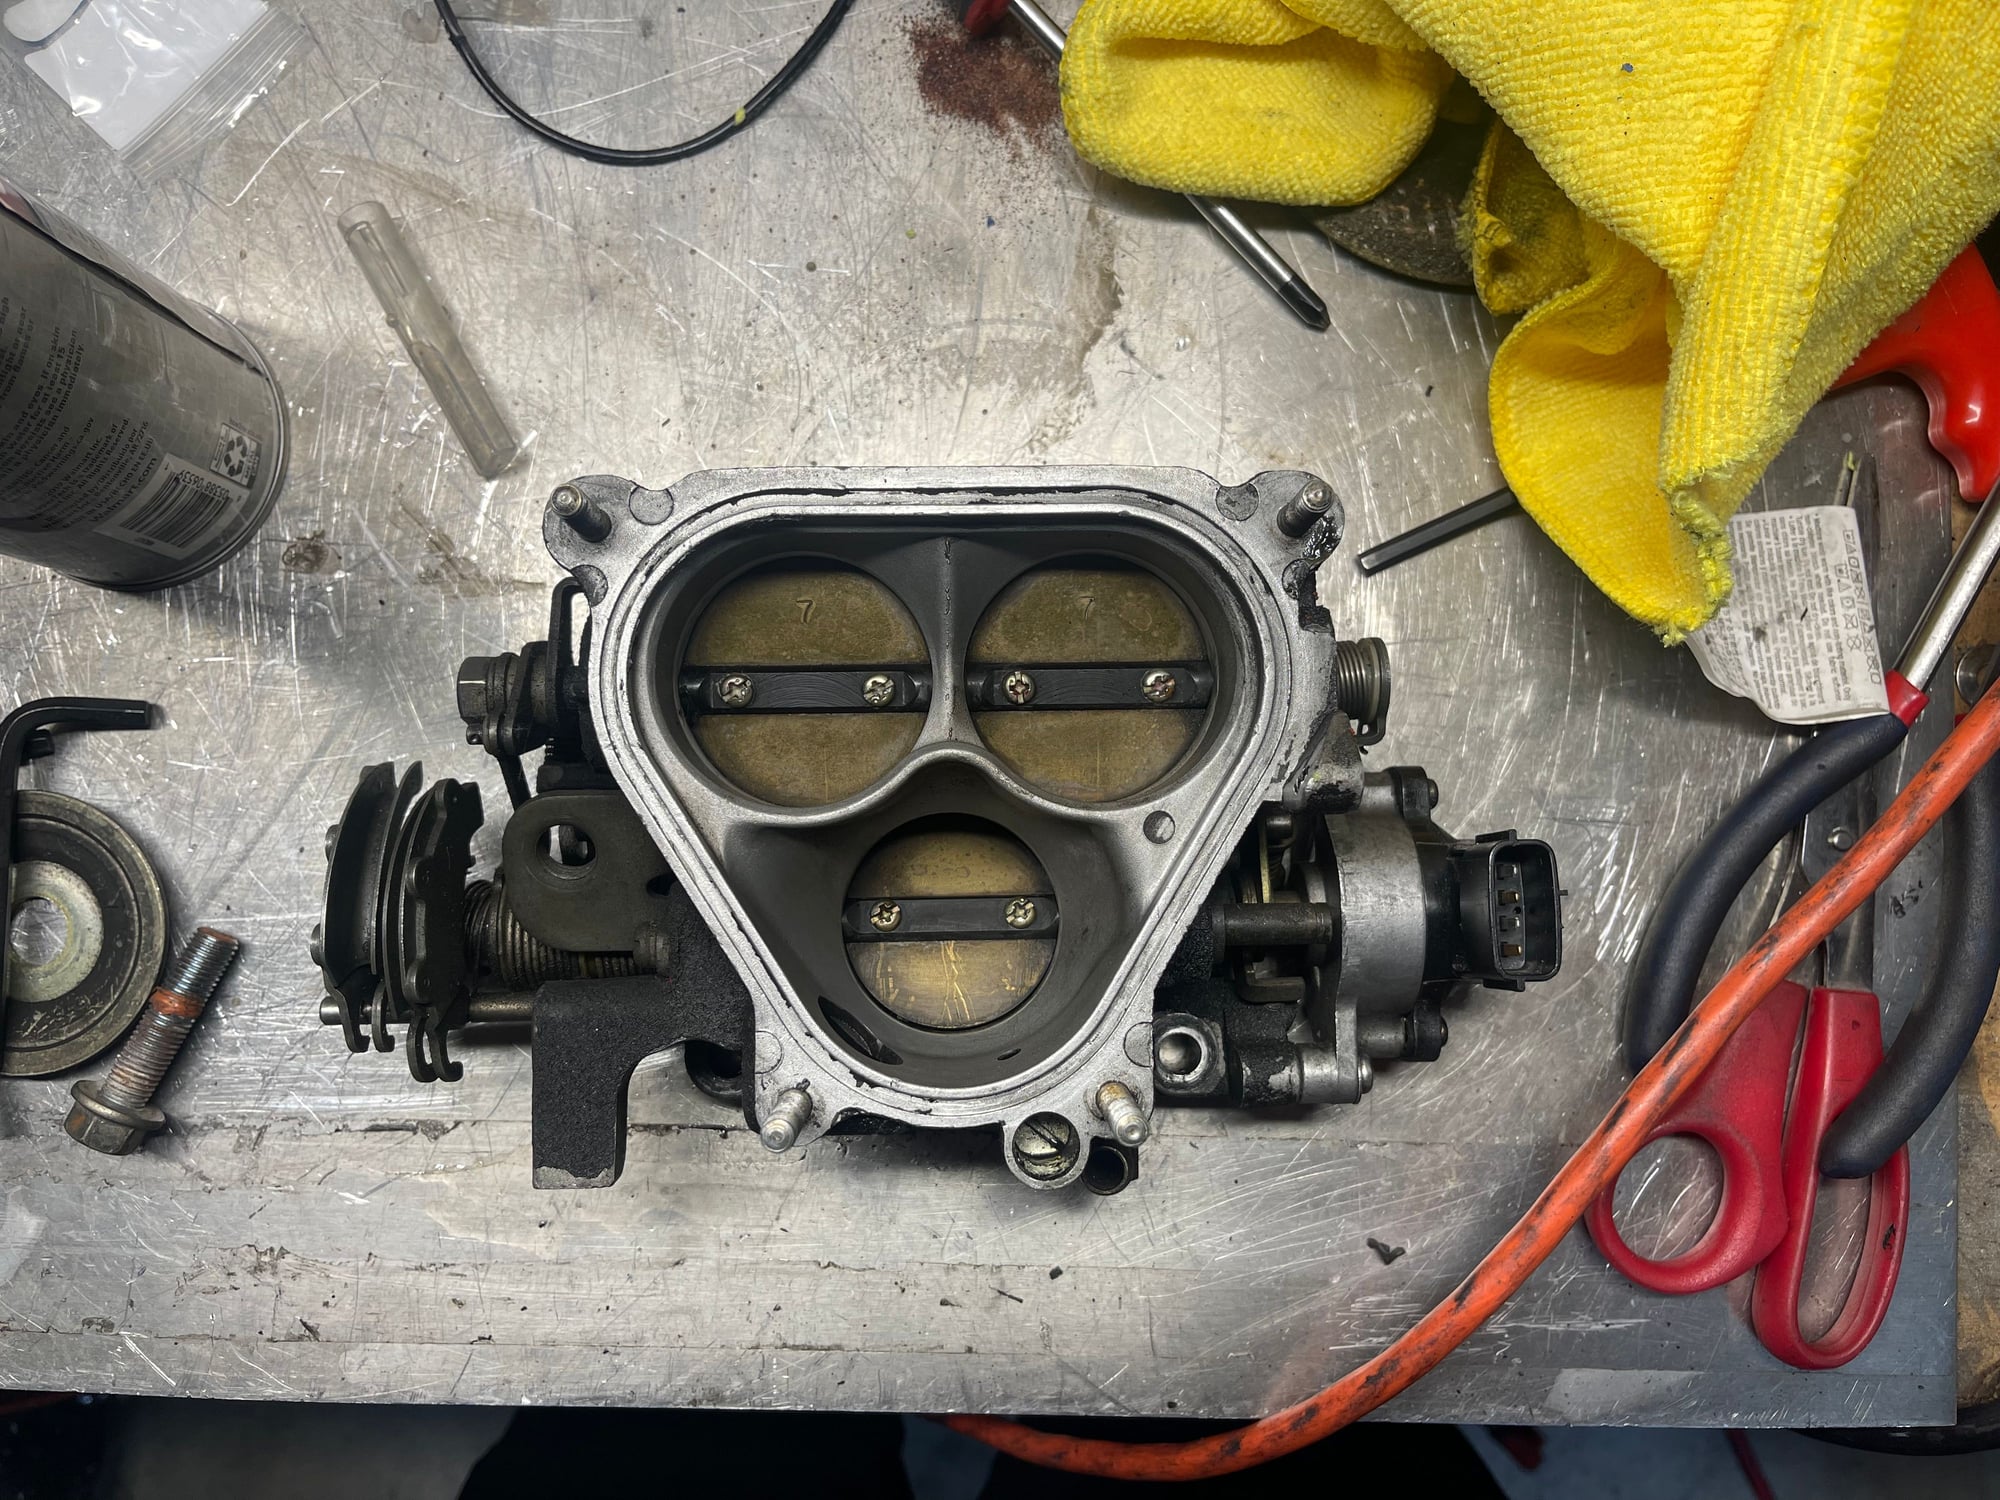 Engine - Intake/Fuel - FD s6 throttle body with TPS - Used - 1992 to 2002 Mazda RX-7 - Everett, WA 98204, United States